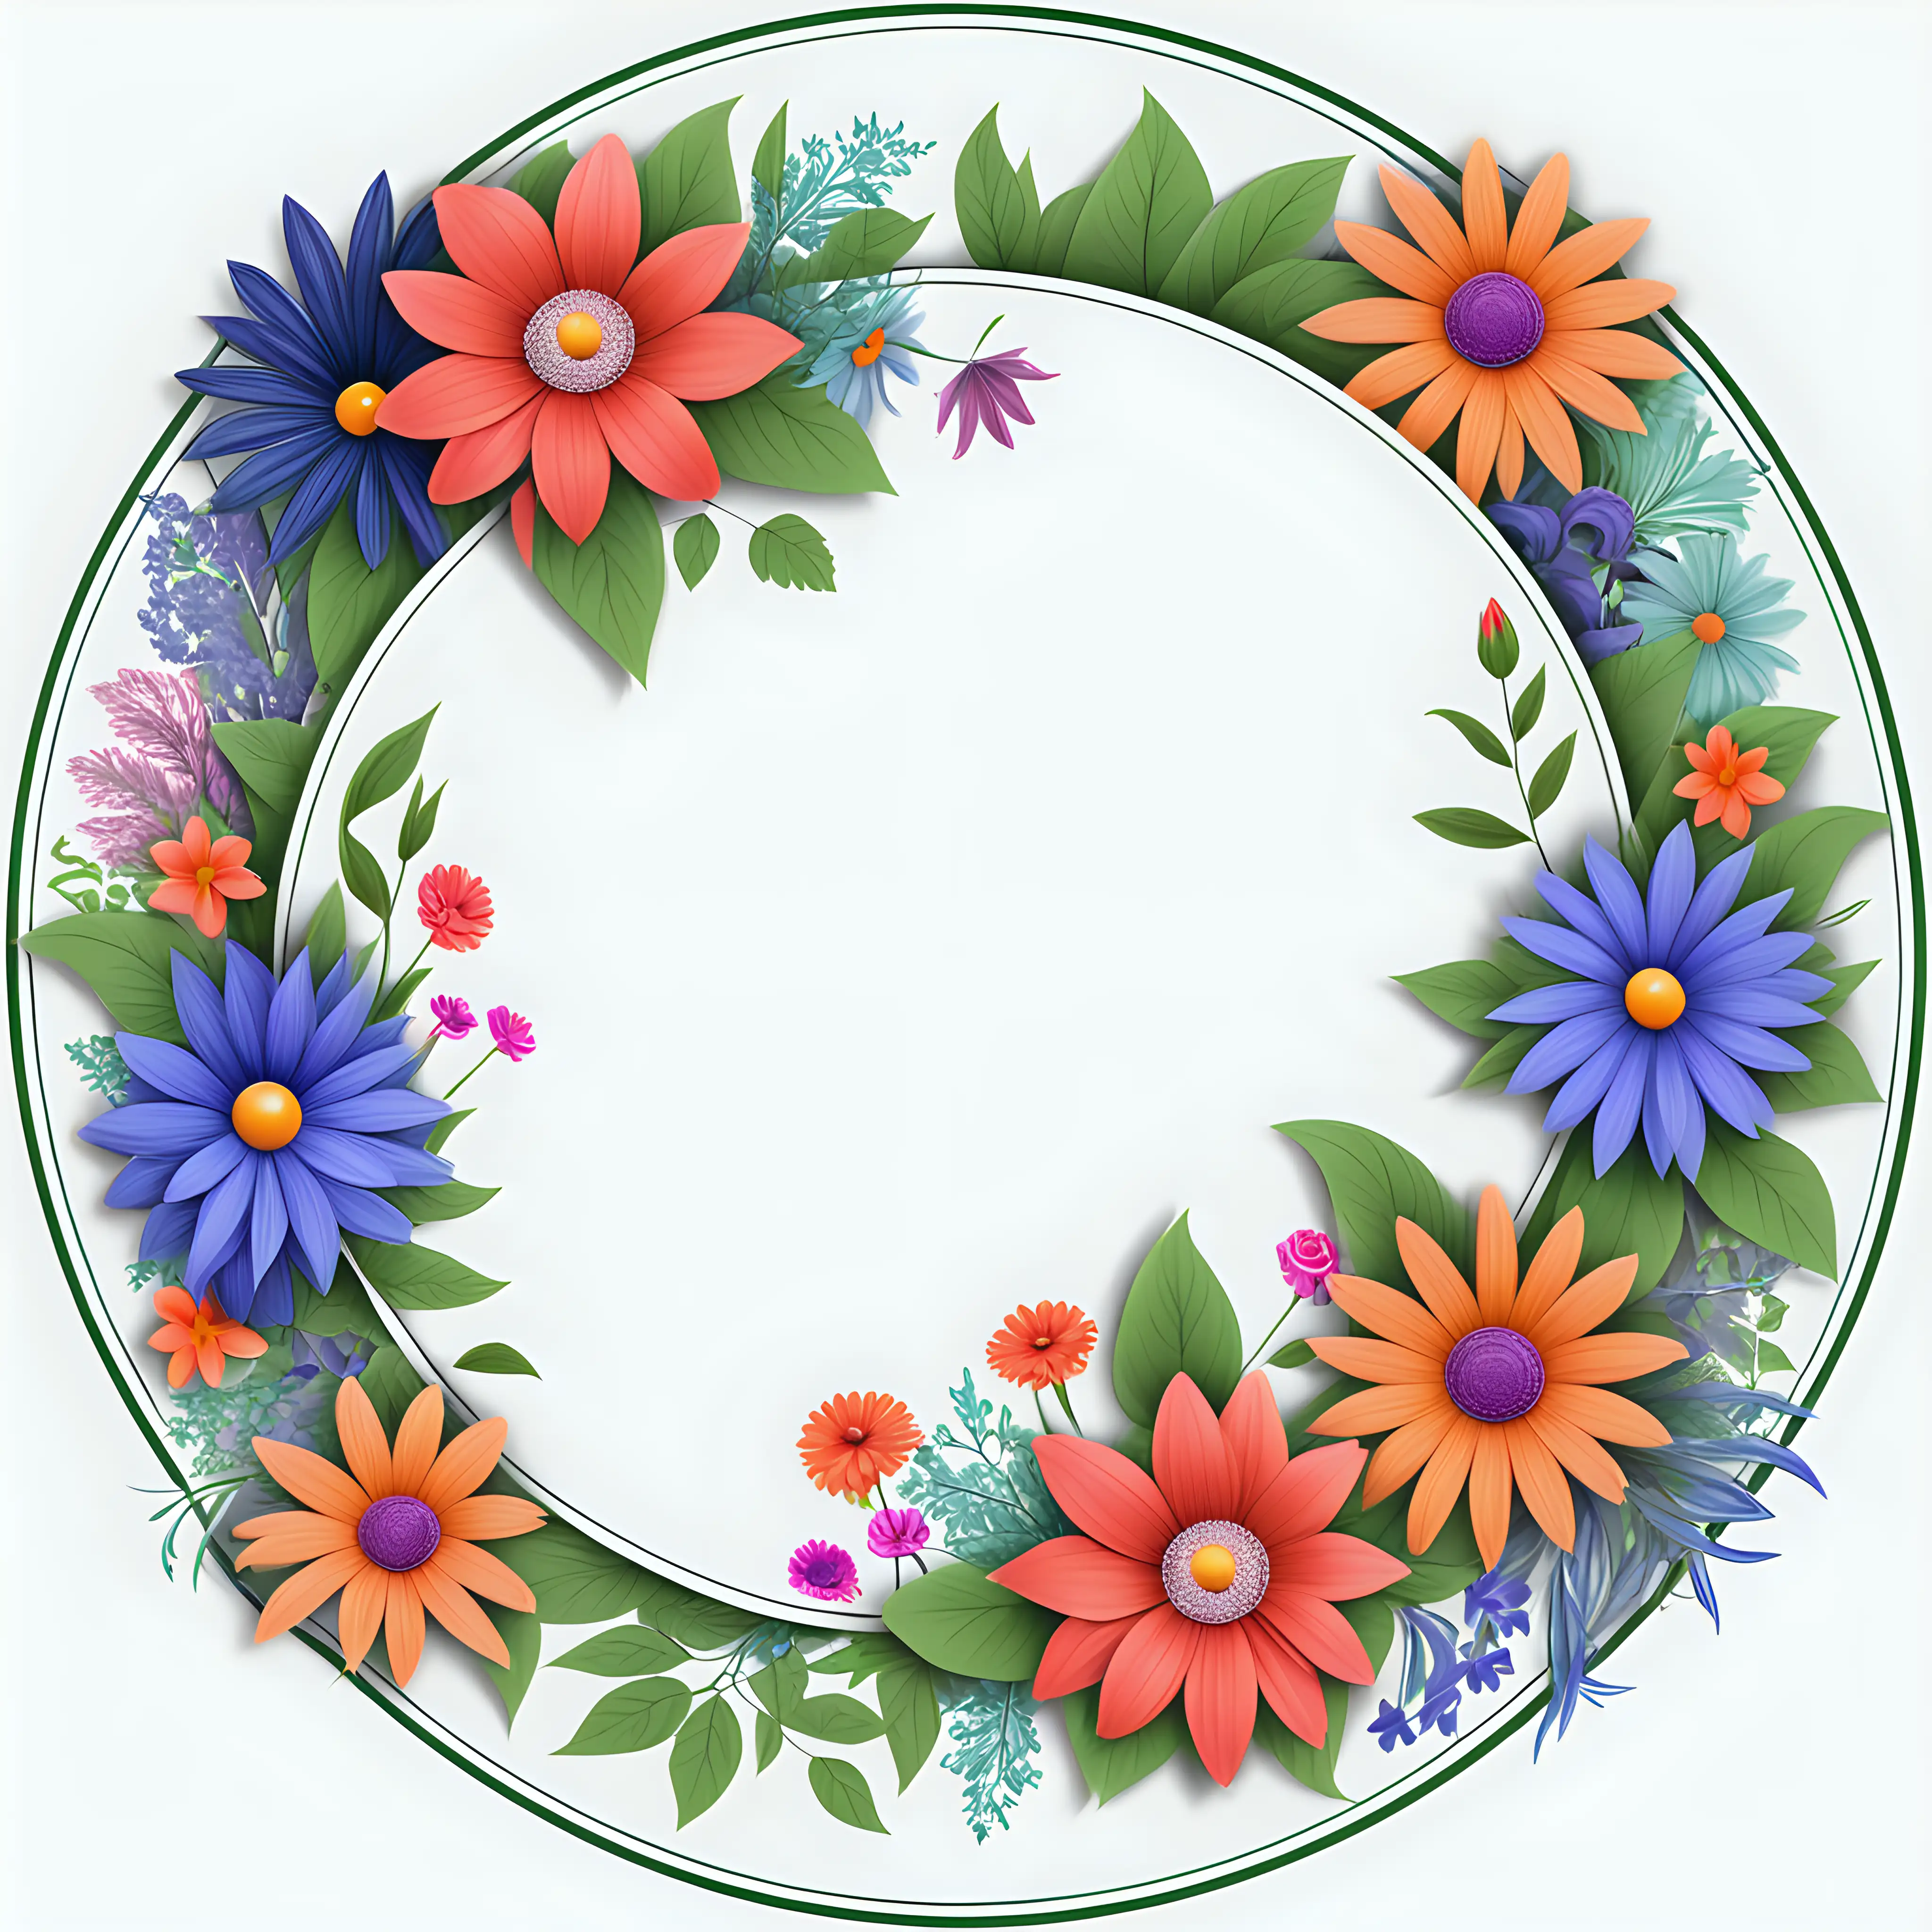 create an beautifully designed, circular border that includes flowers. fit it all in the image. 